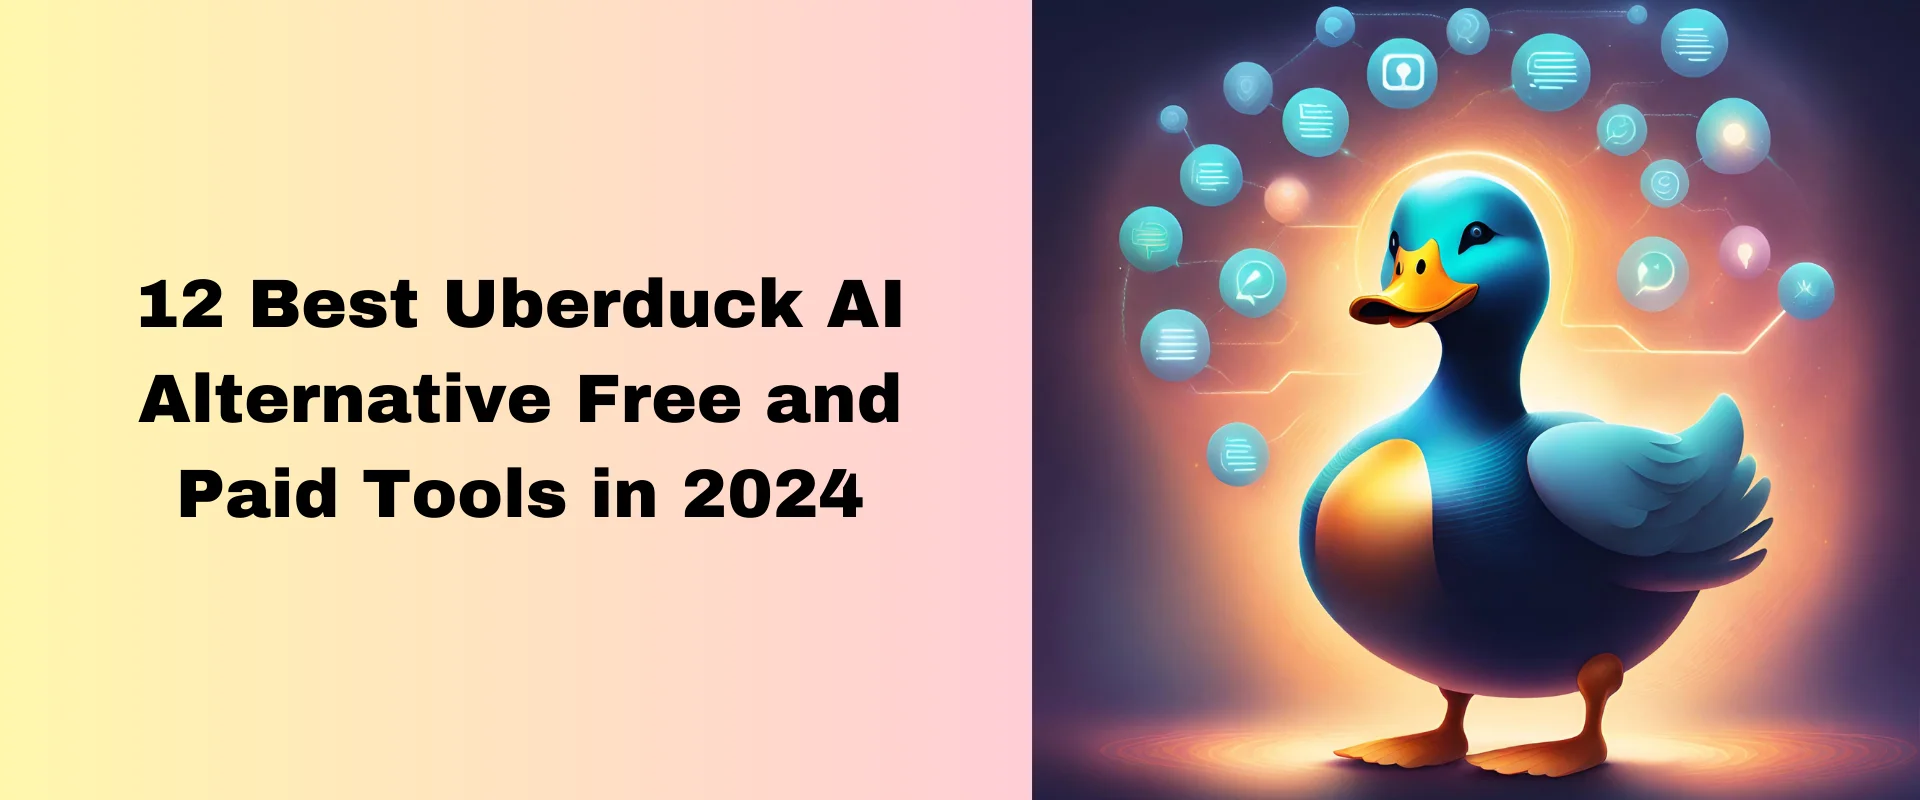 12 Best Uberduck AI Alternative Free and Paid Tools in 2024